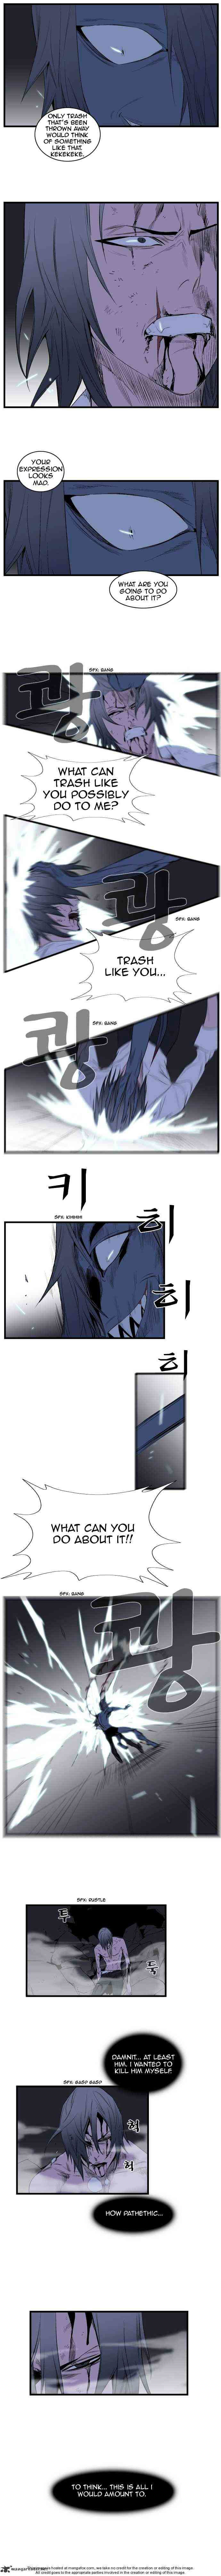 Noblesse Chapter 76 _ Chapters 76-90 page 79